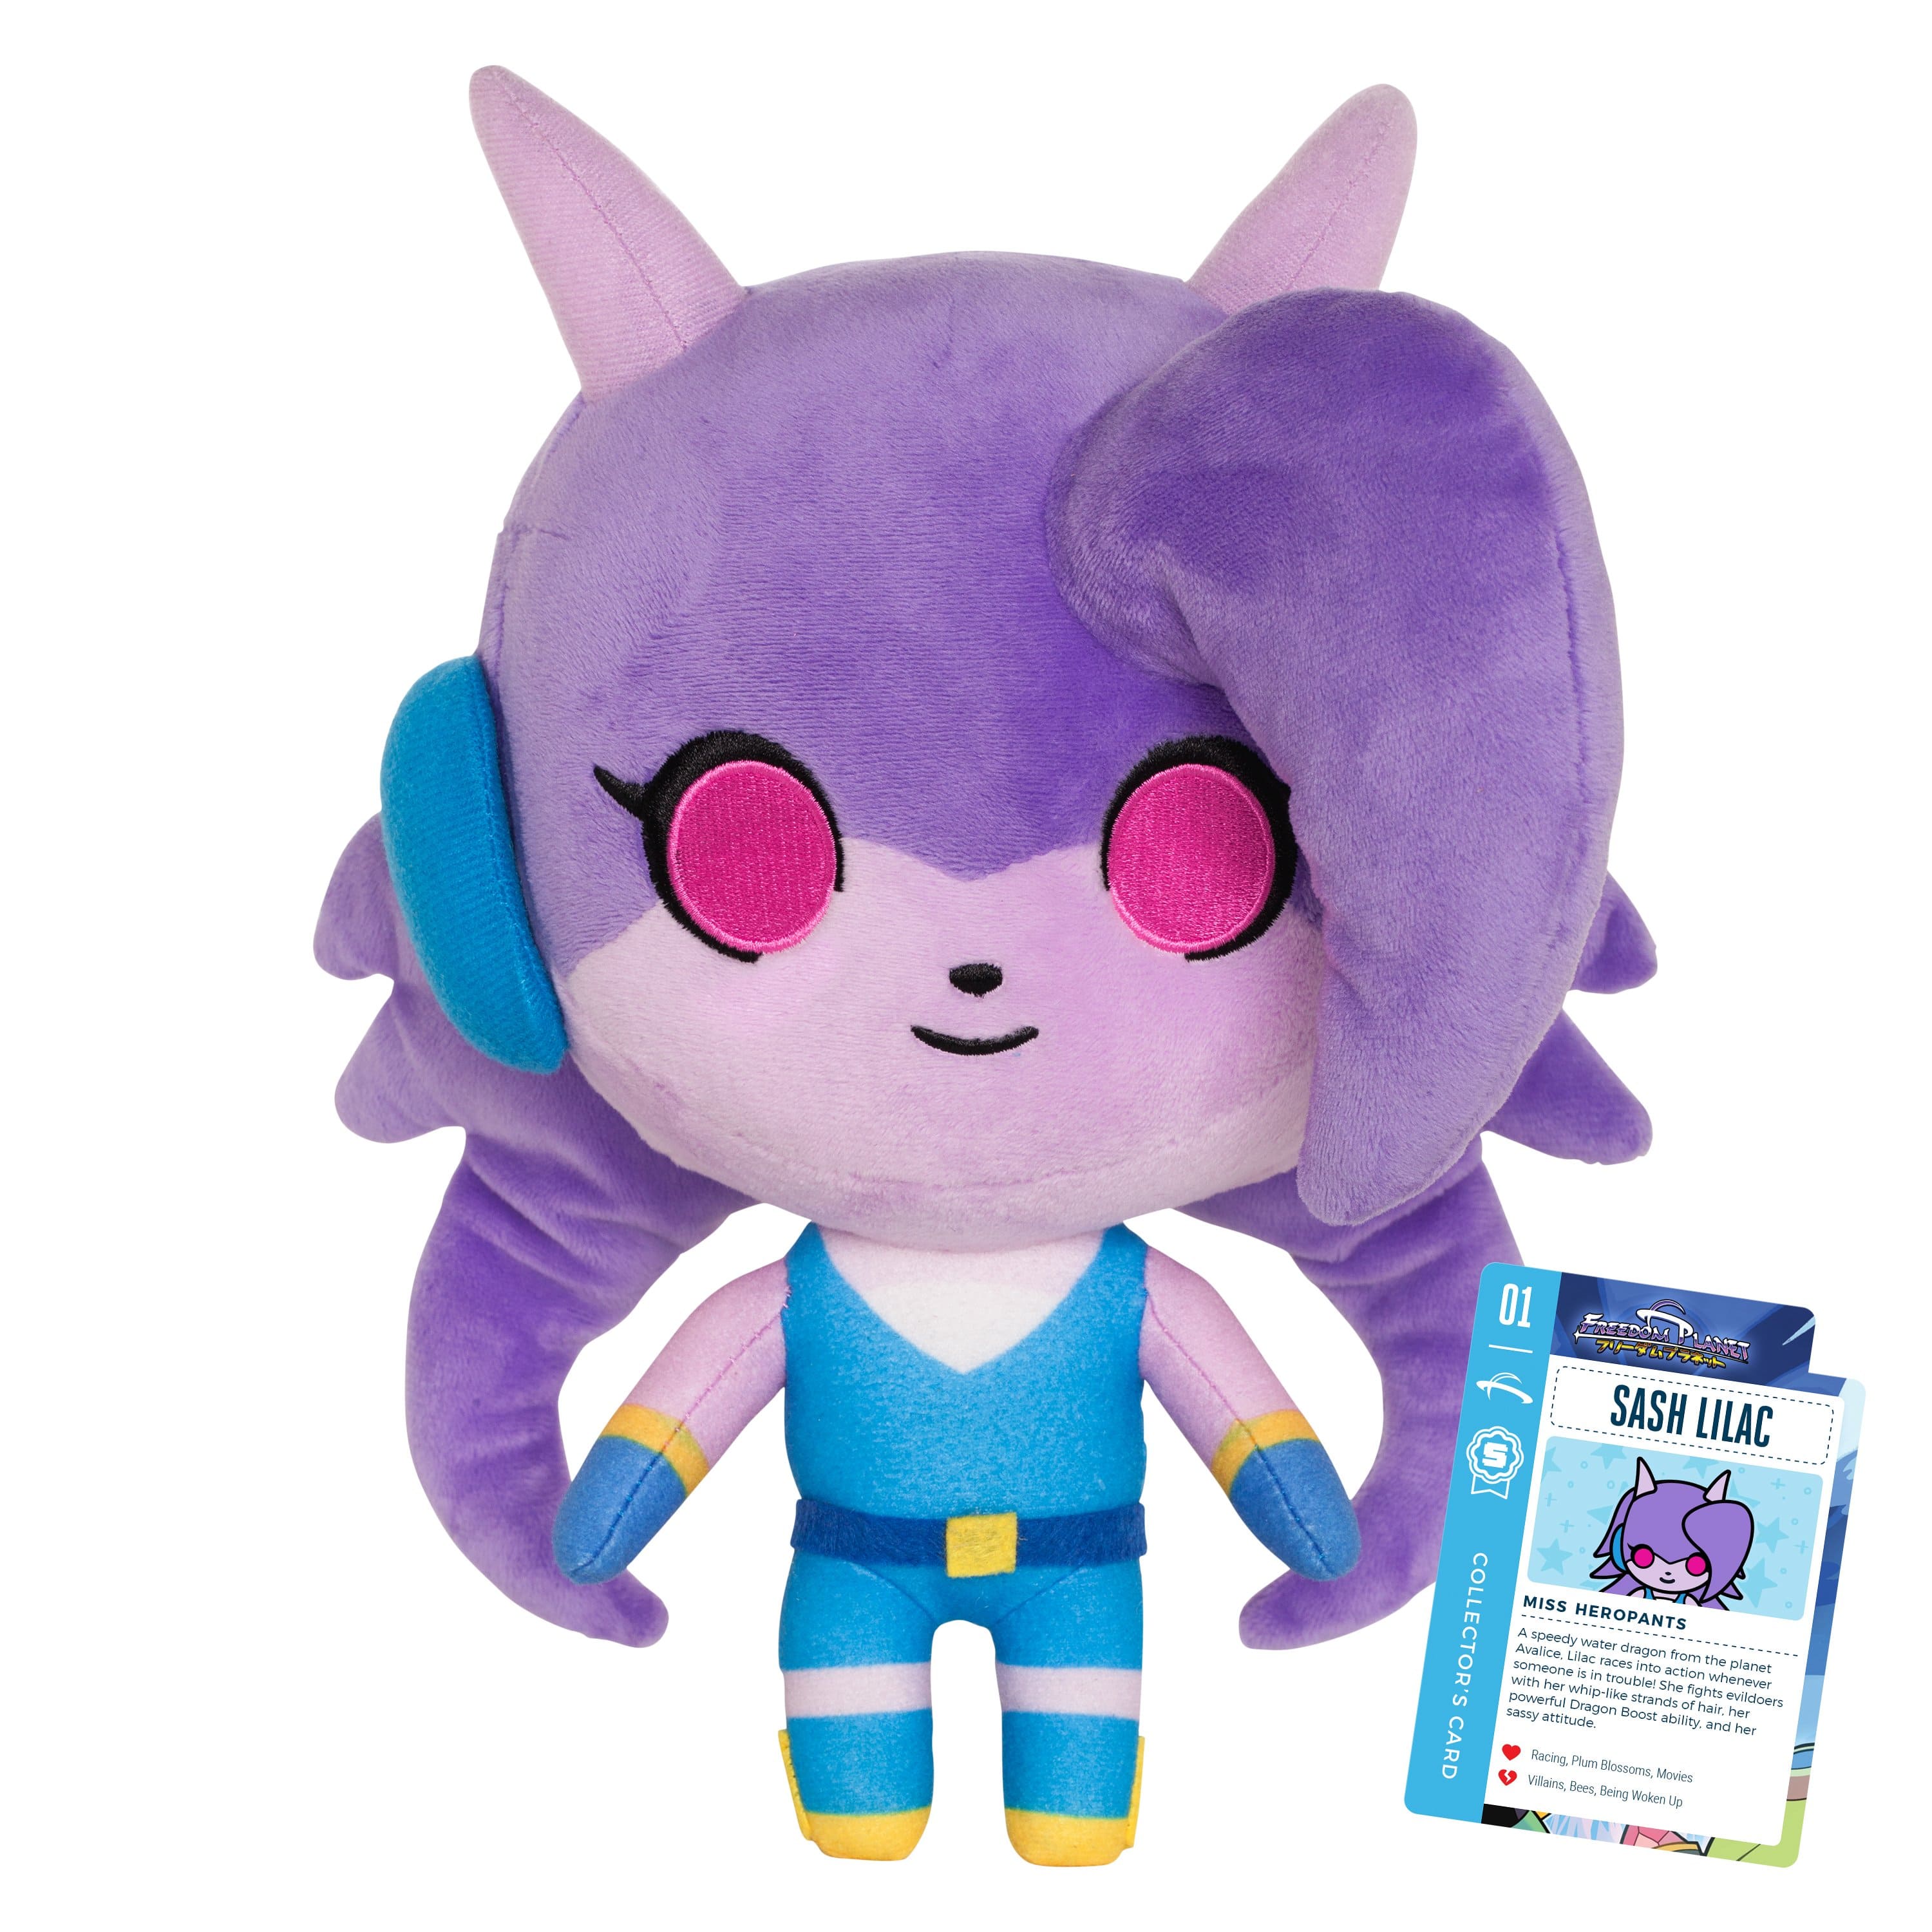 Freedom Planet - 10" Sash Lilac Collector's Stuffed Plush Toy With Collector's Card